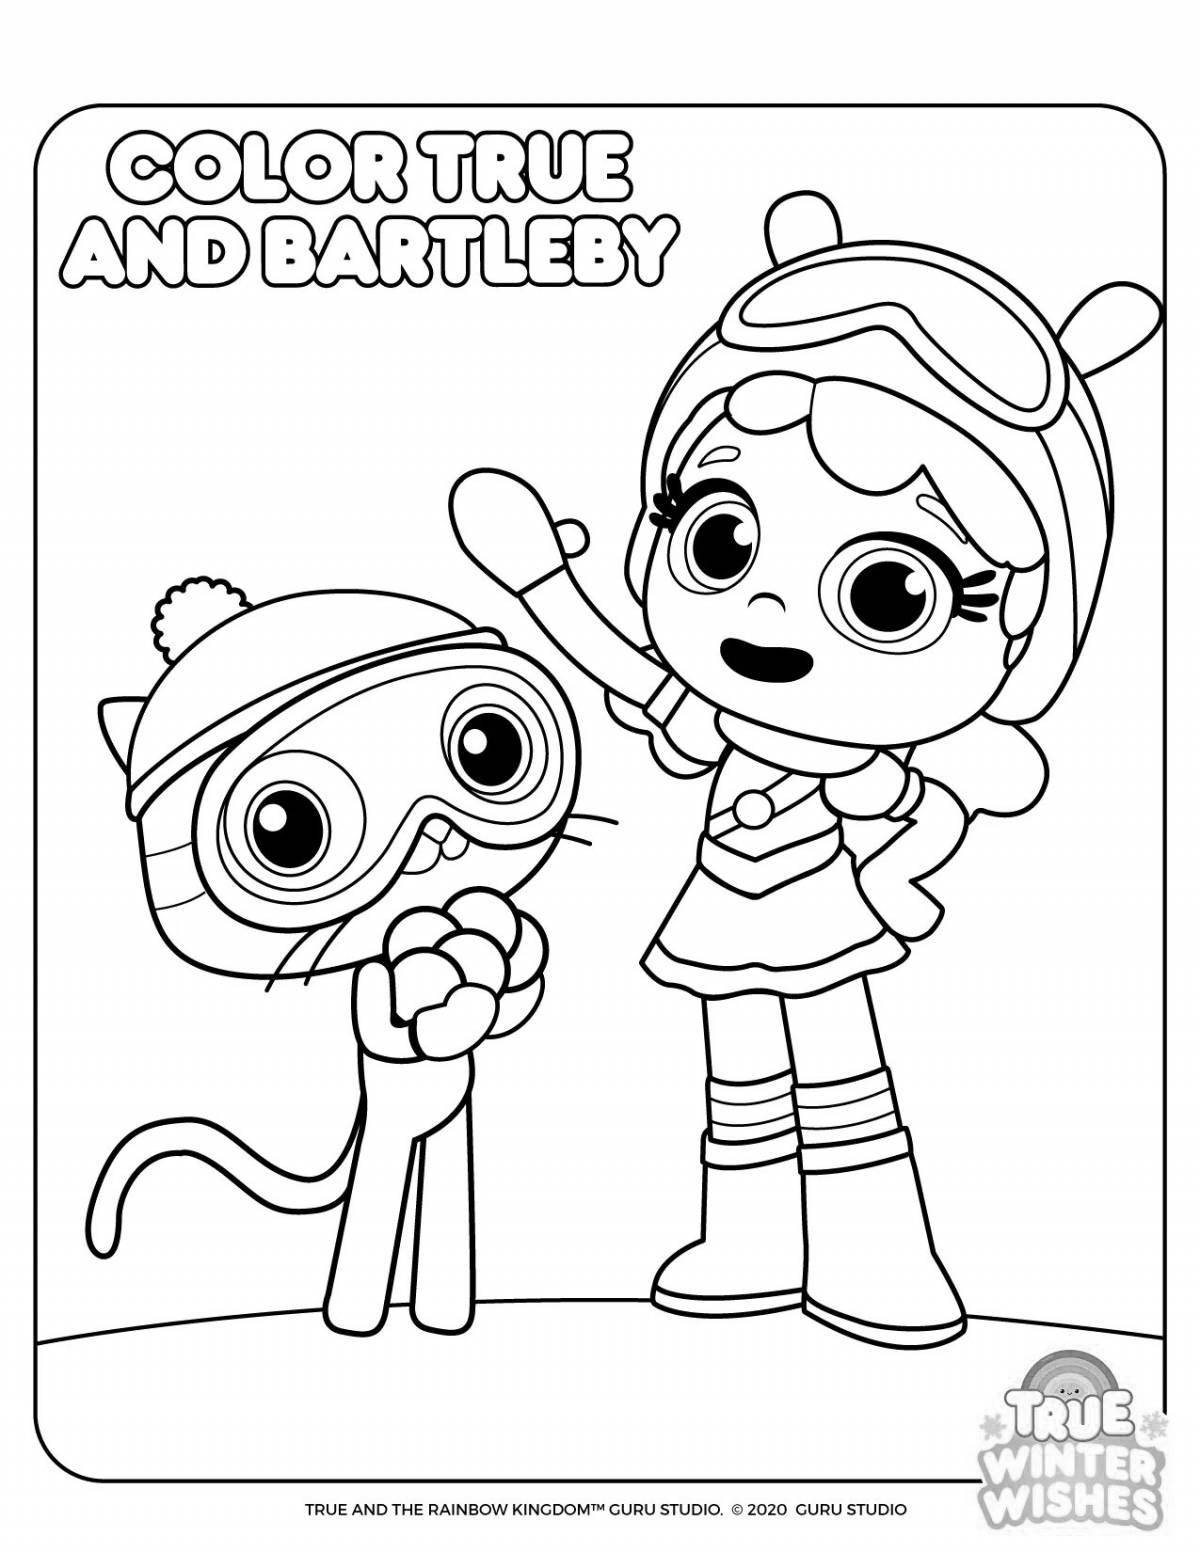 Exciting rainbow kingdom coloring book